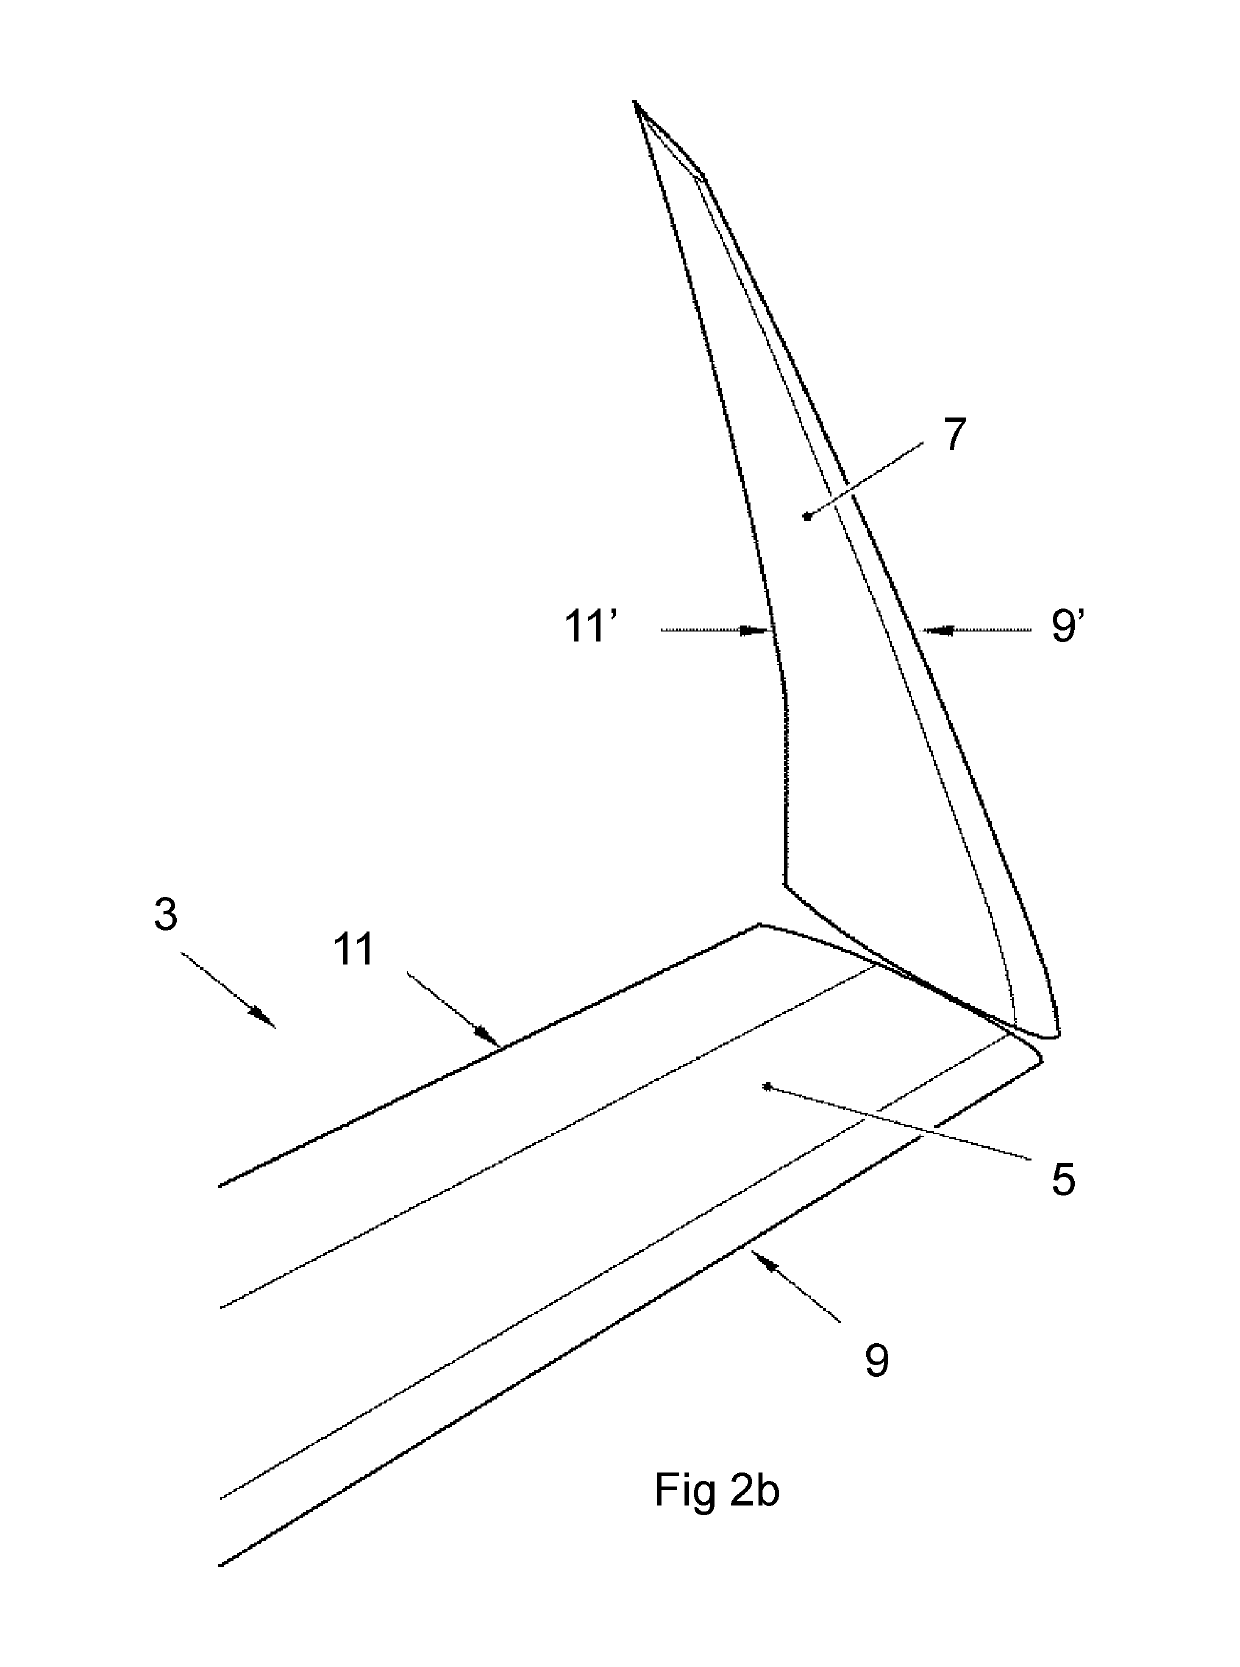 Actuation assembly with a track and follower for use in moving a wing tip device on an aircraft wing